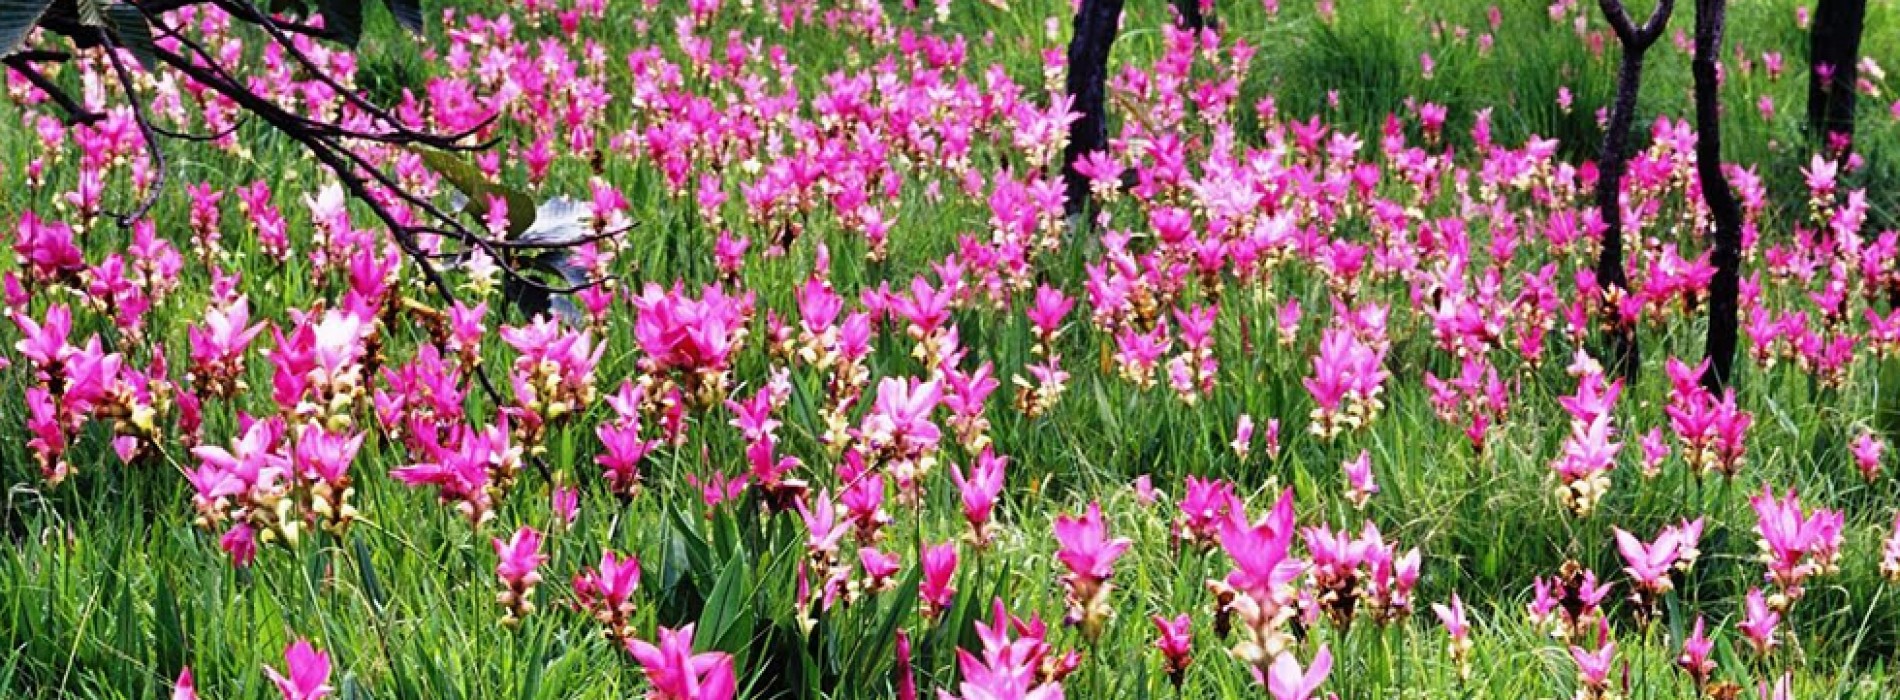 Thailand invites the world to enjoy the glorious Tulips of Chaiyaphum